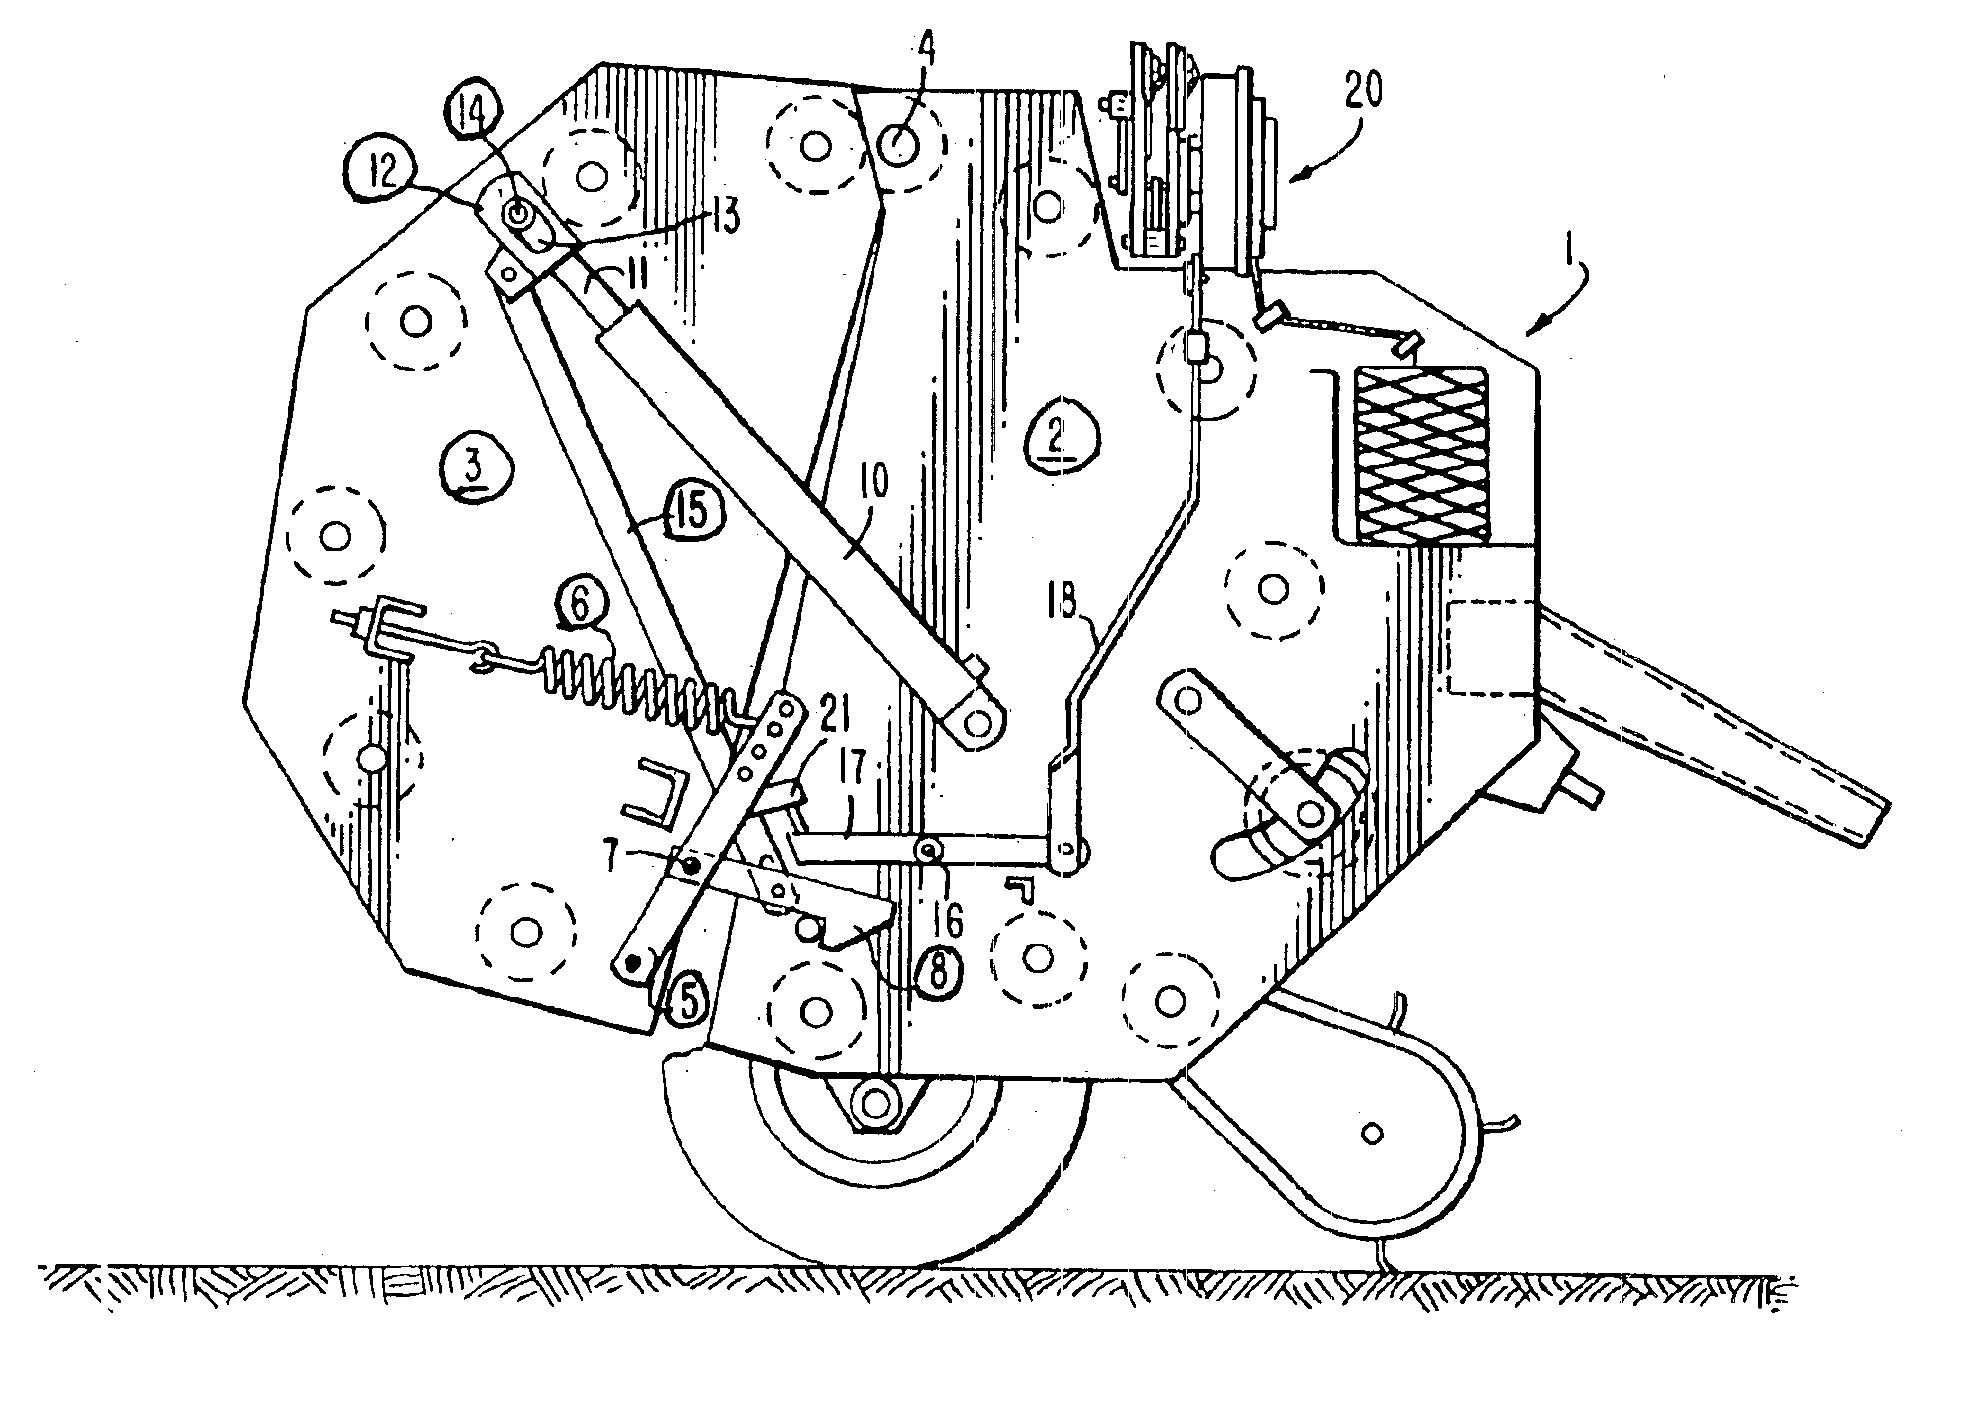 Actuating mechanism for the functional elements in a round baler